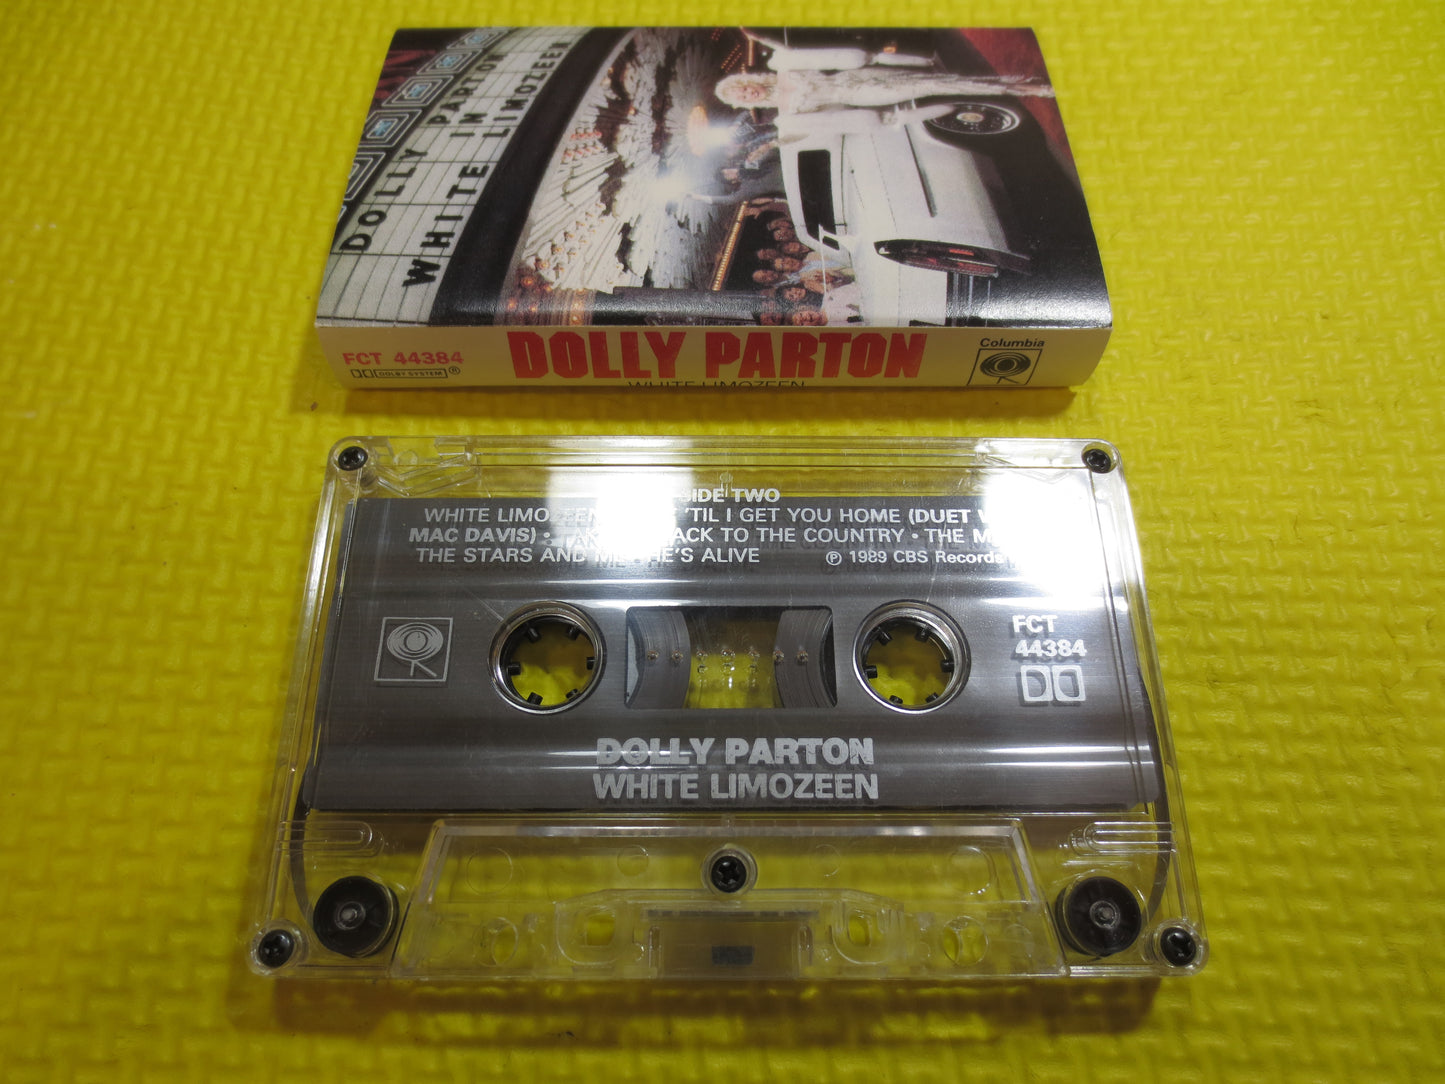 Dolly Parton, Dolly and Porter, Country Tapes, Dolly Albums, Dolly Parton Music, Cassette Tapes, Tapes, 1989 Cassette